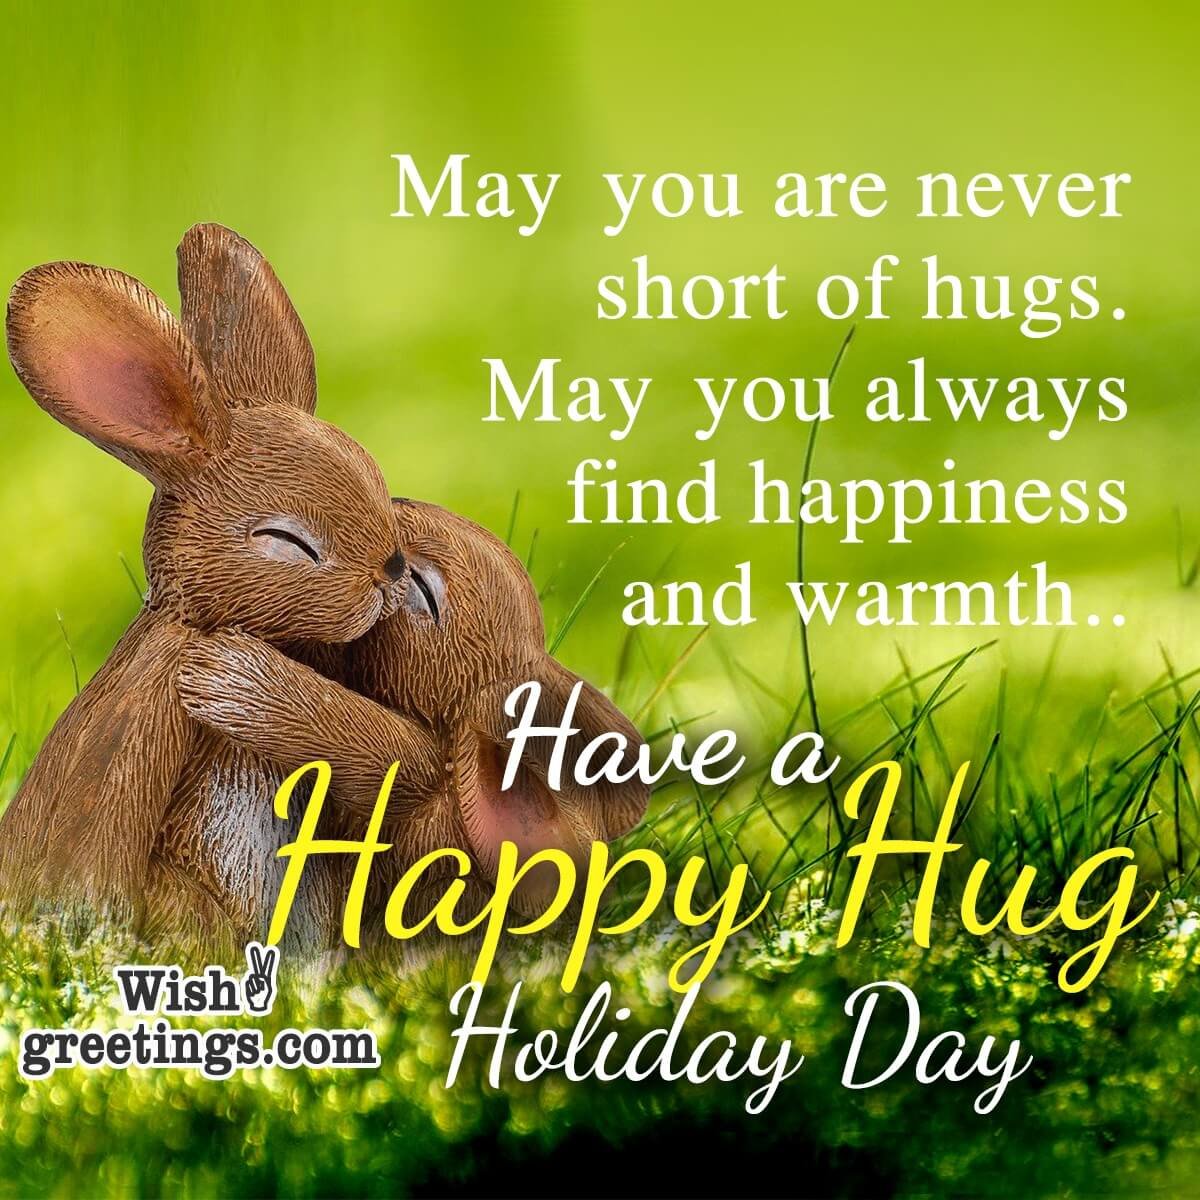 Have A Happy Hug Holiday Day